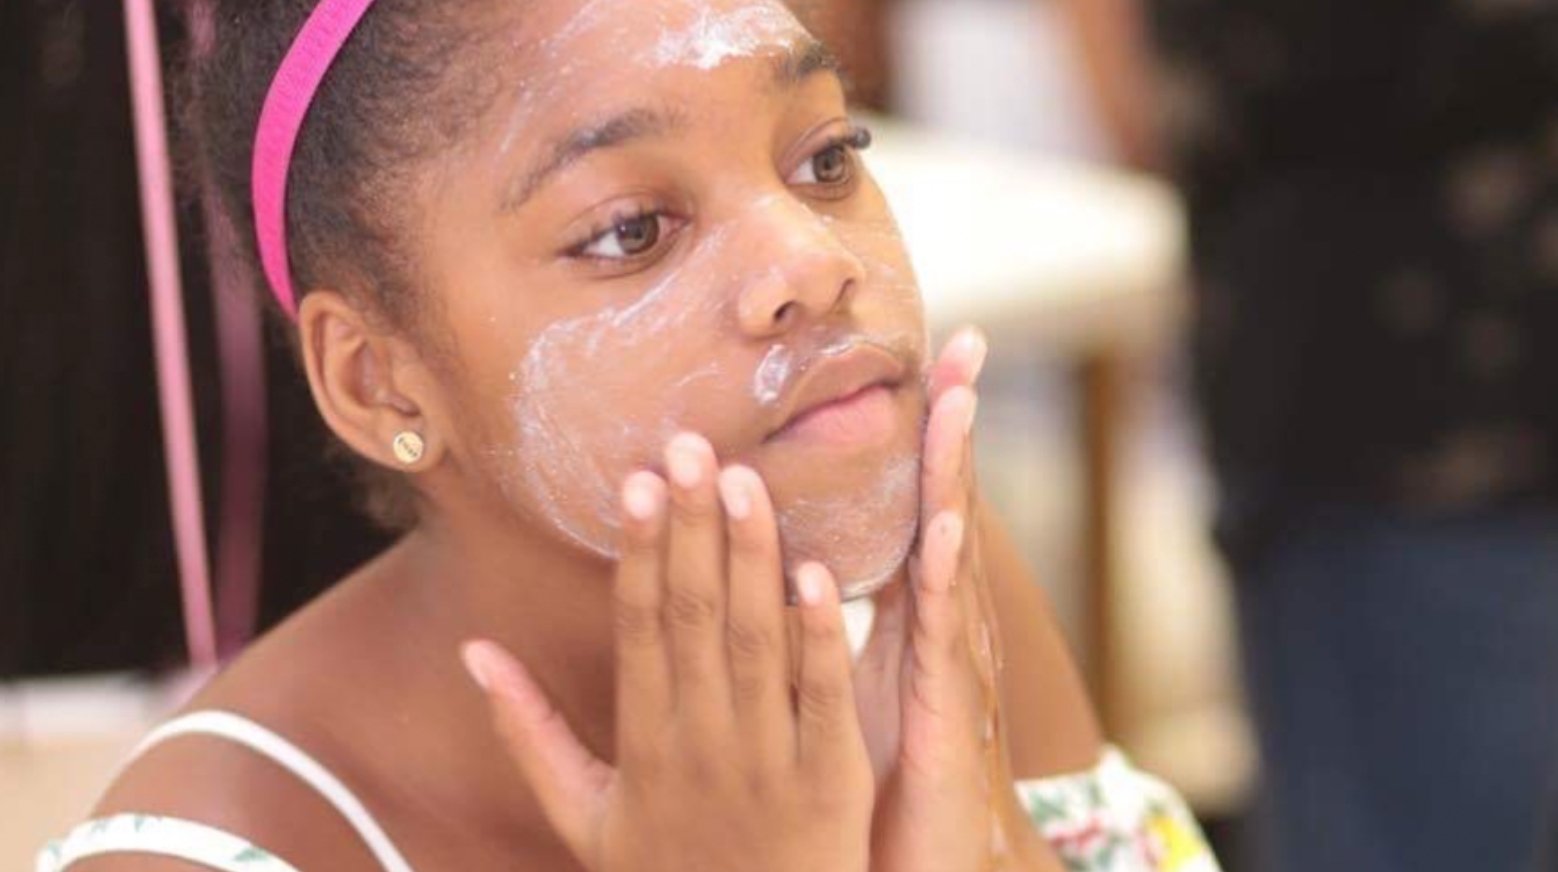 Why teaching teens self-care and healthy skin habits early is crucial - Skin by Brownlee & Co.